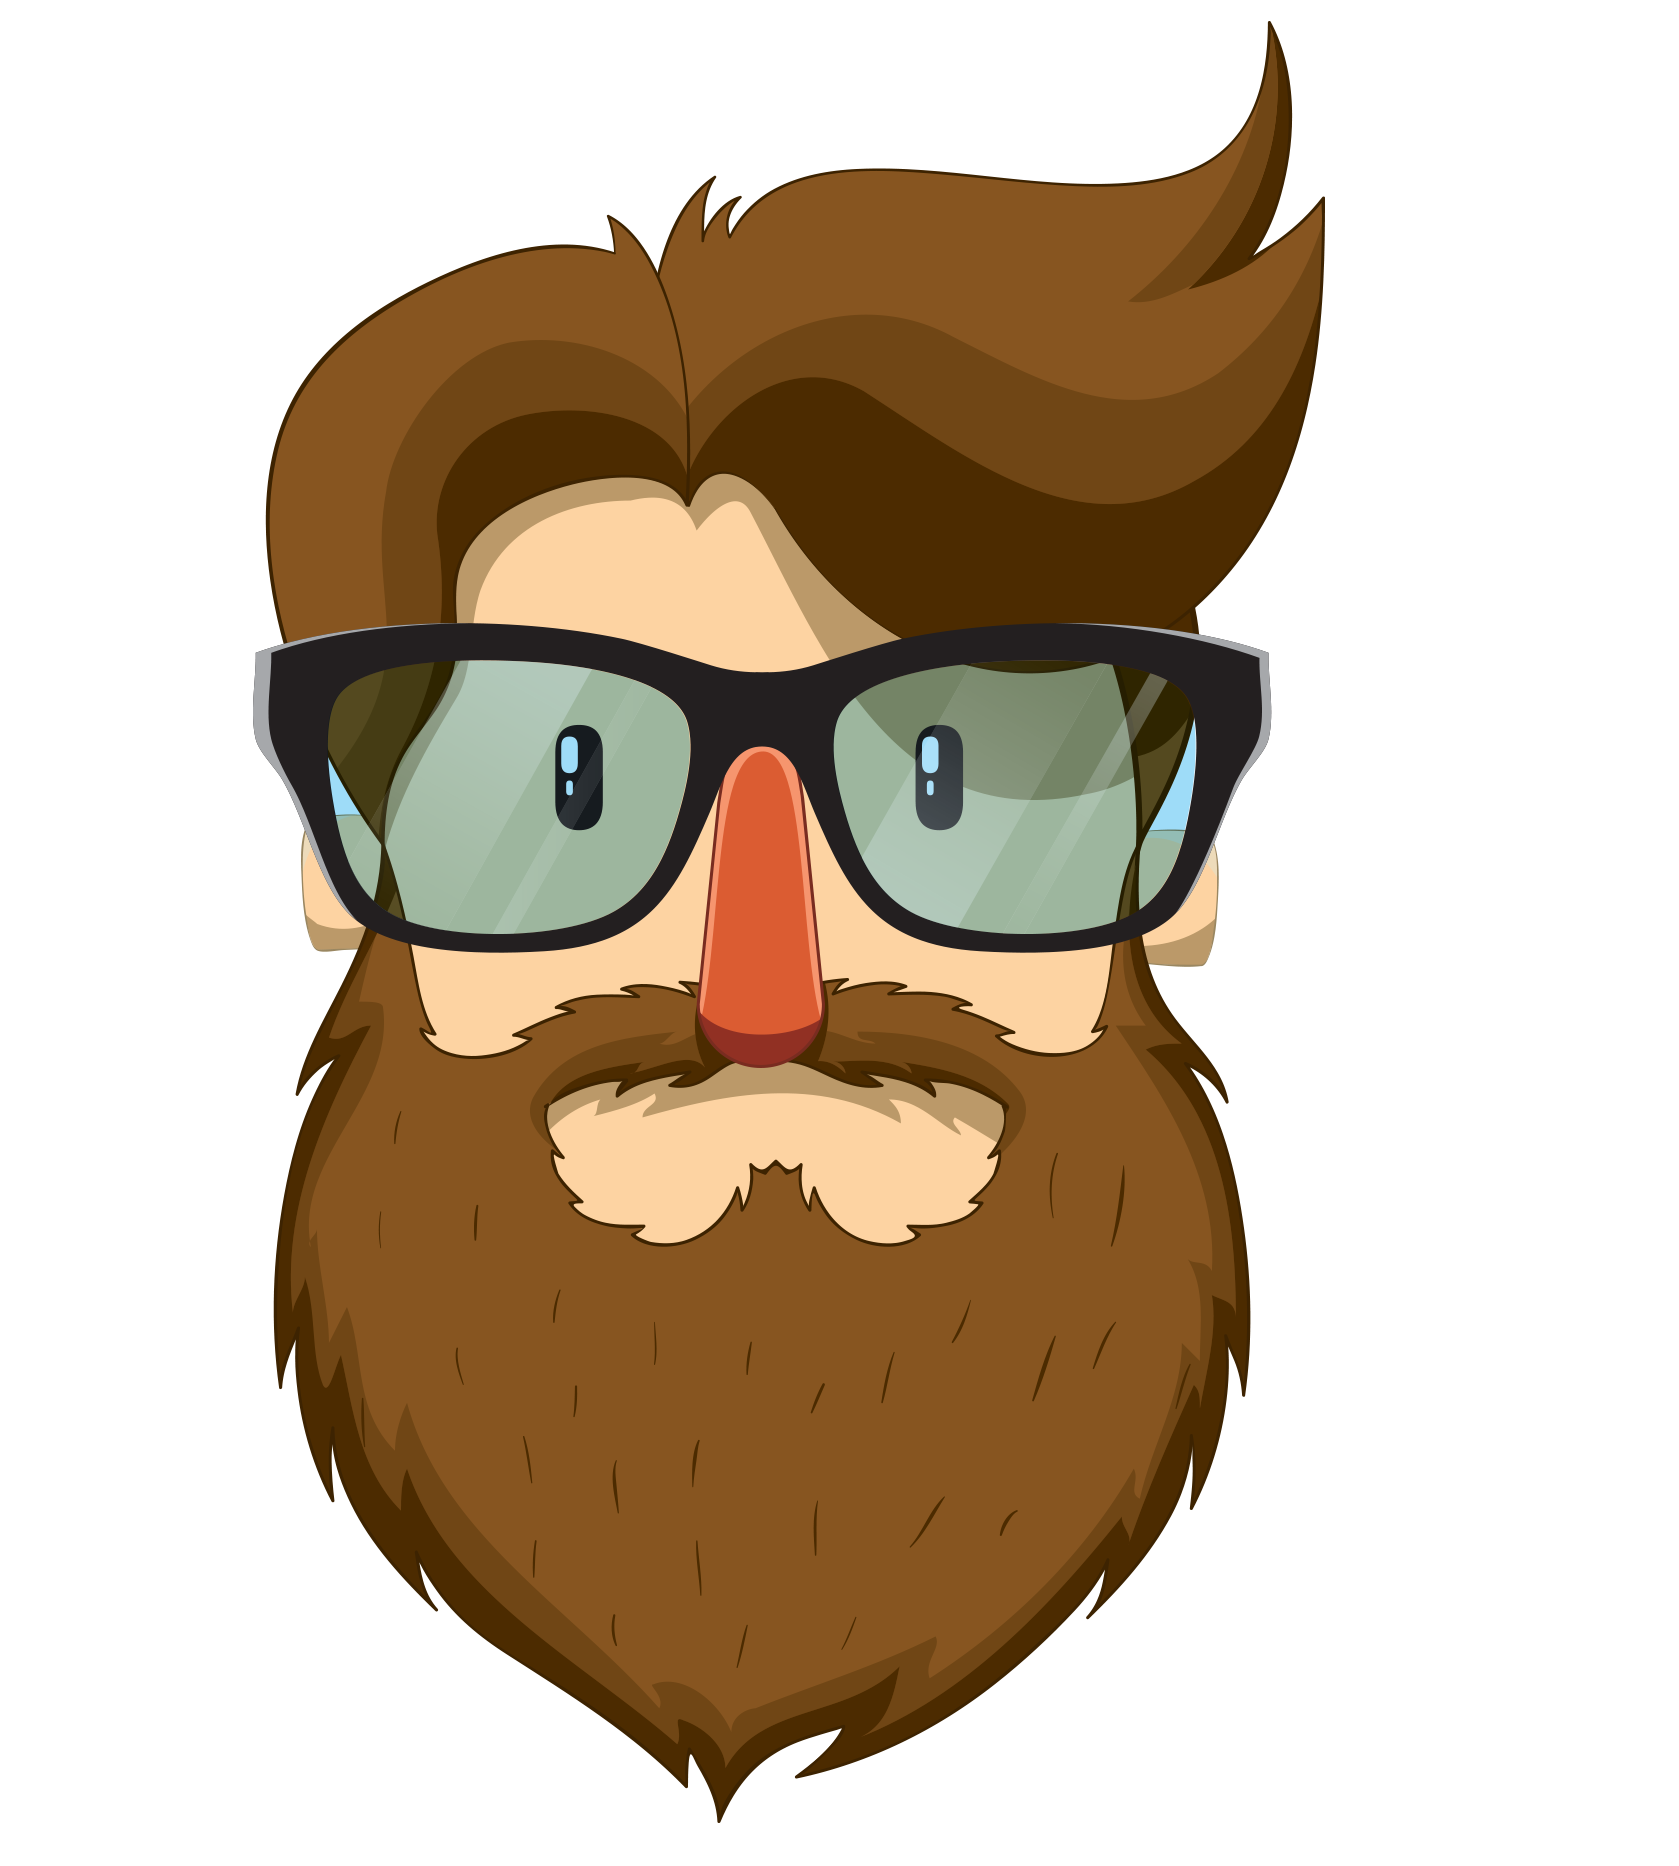 Beard Man Moustache Clip art - Bearded man with glasses png download ...